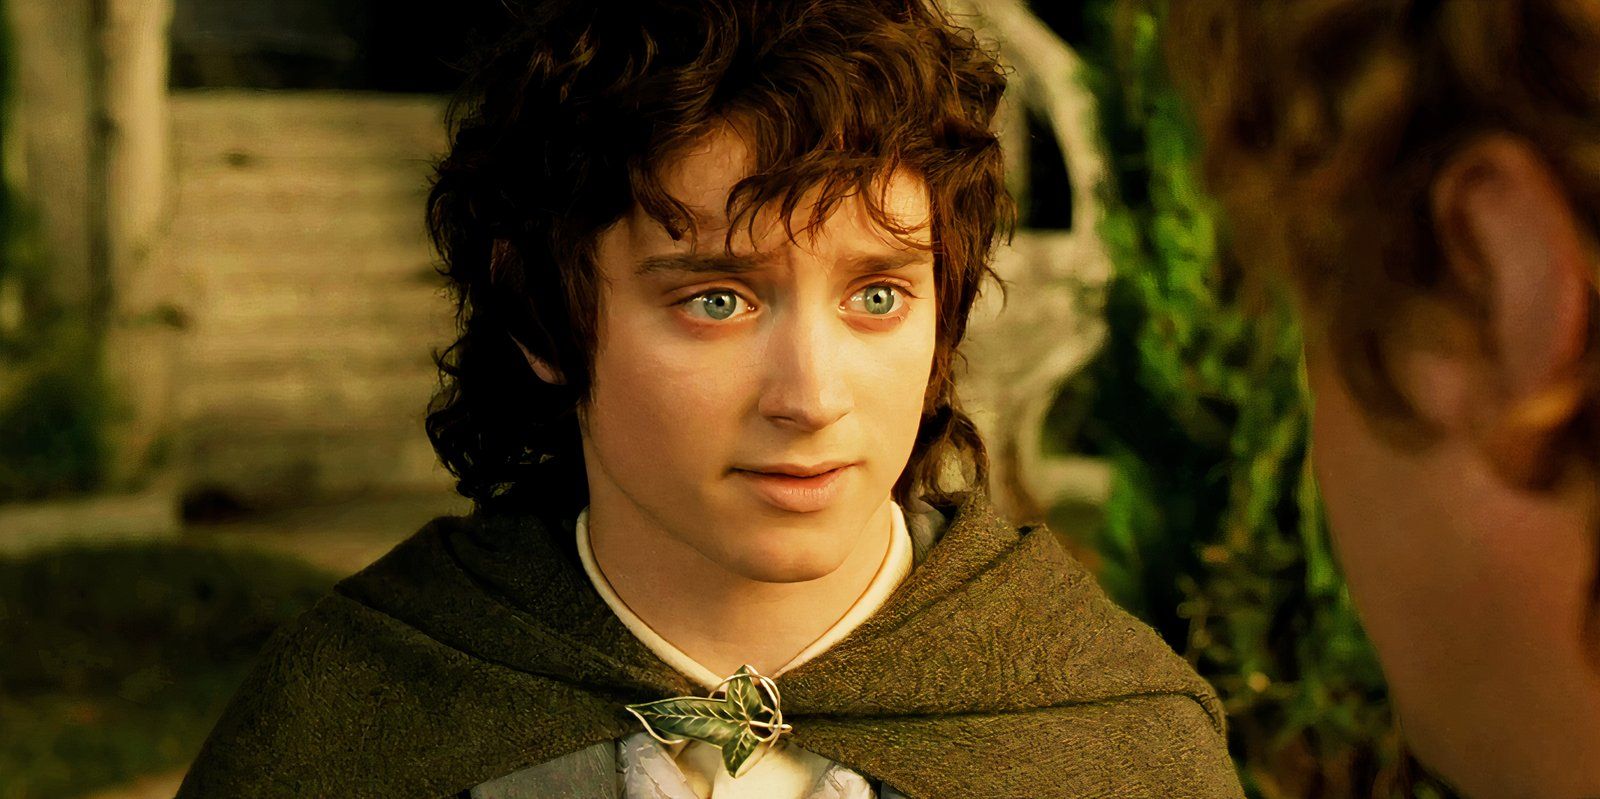 Elijah Wood as Frodo in The Lord of the Rings The Return of the King